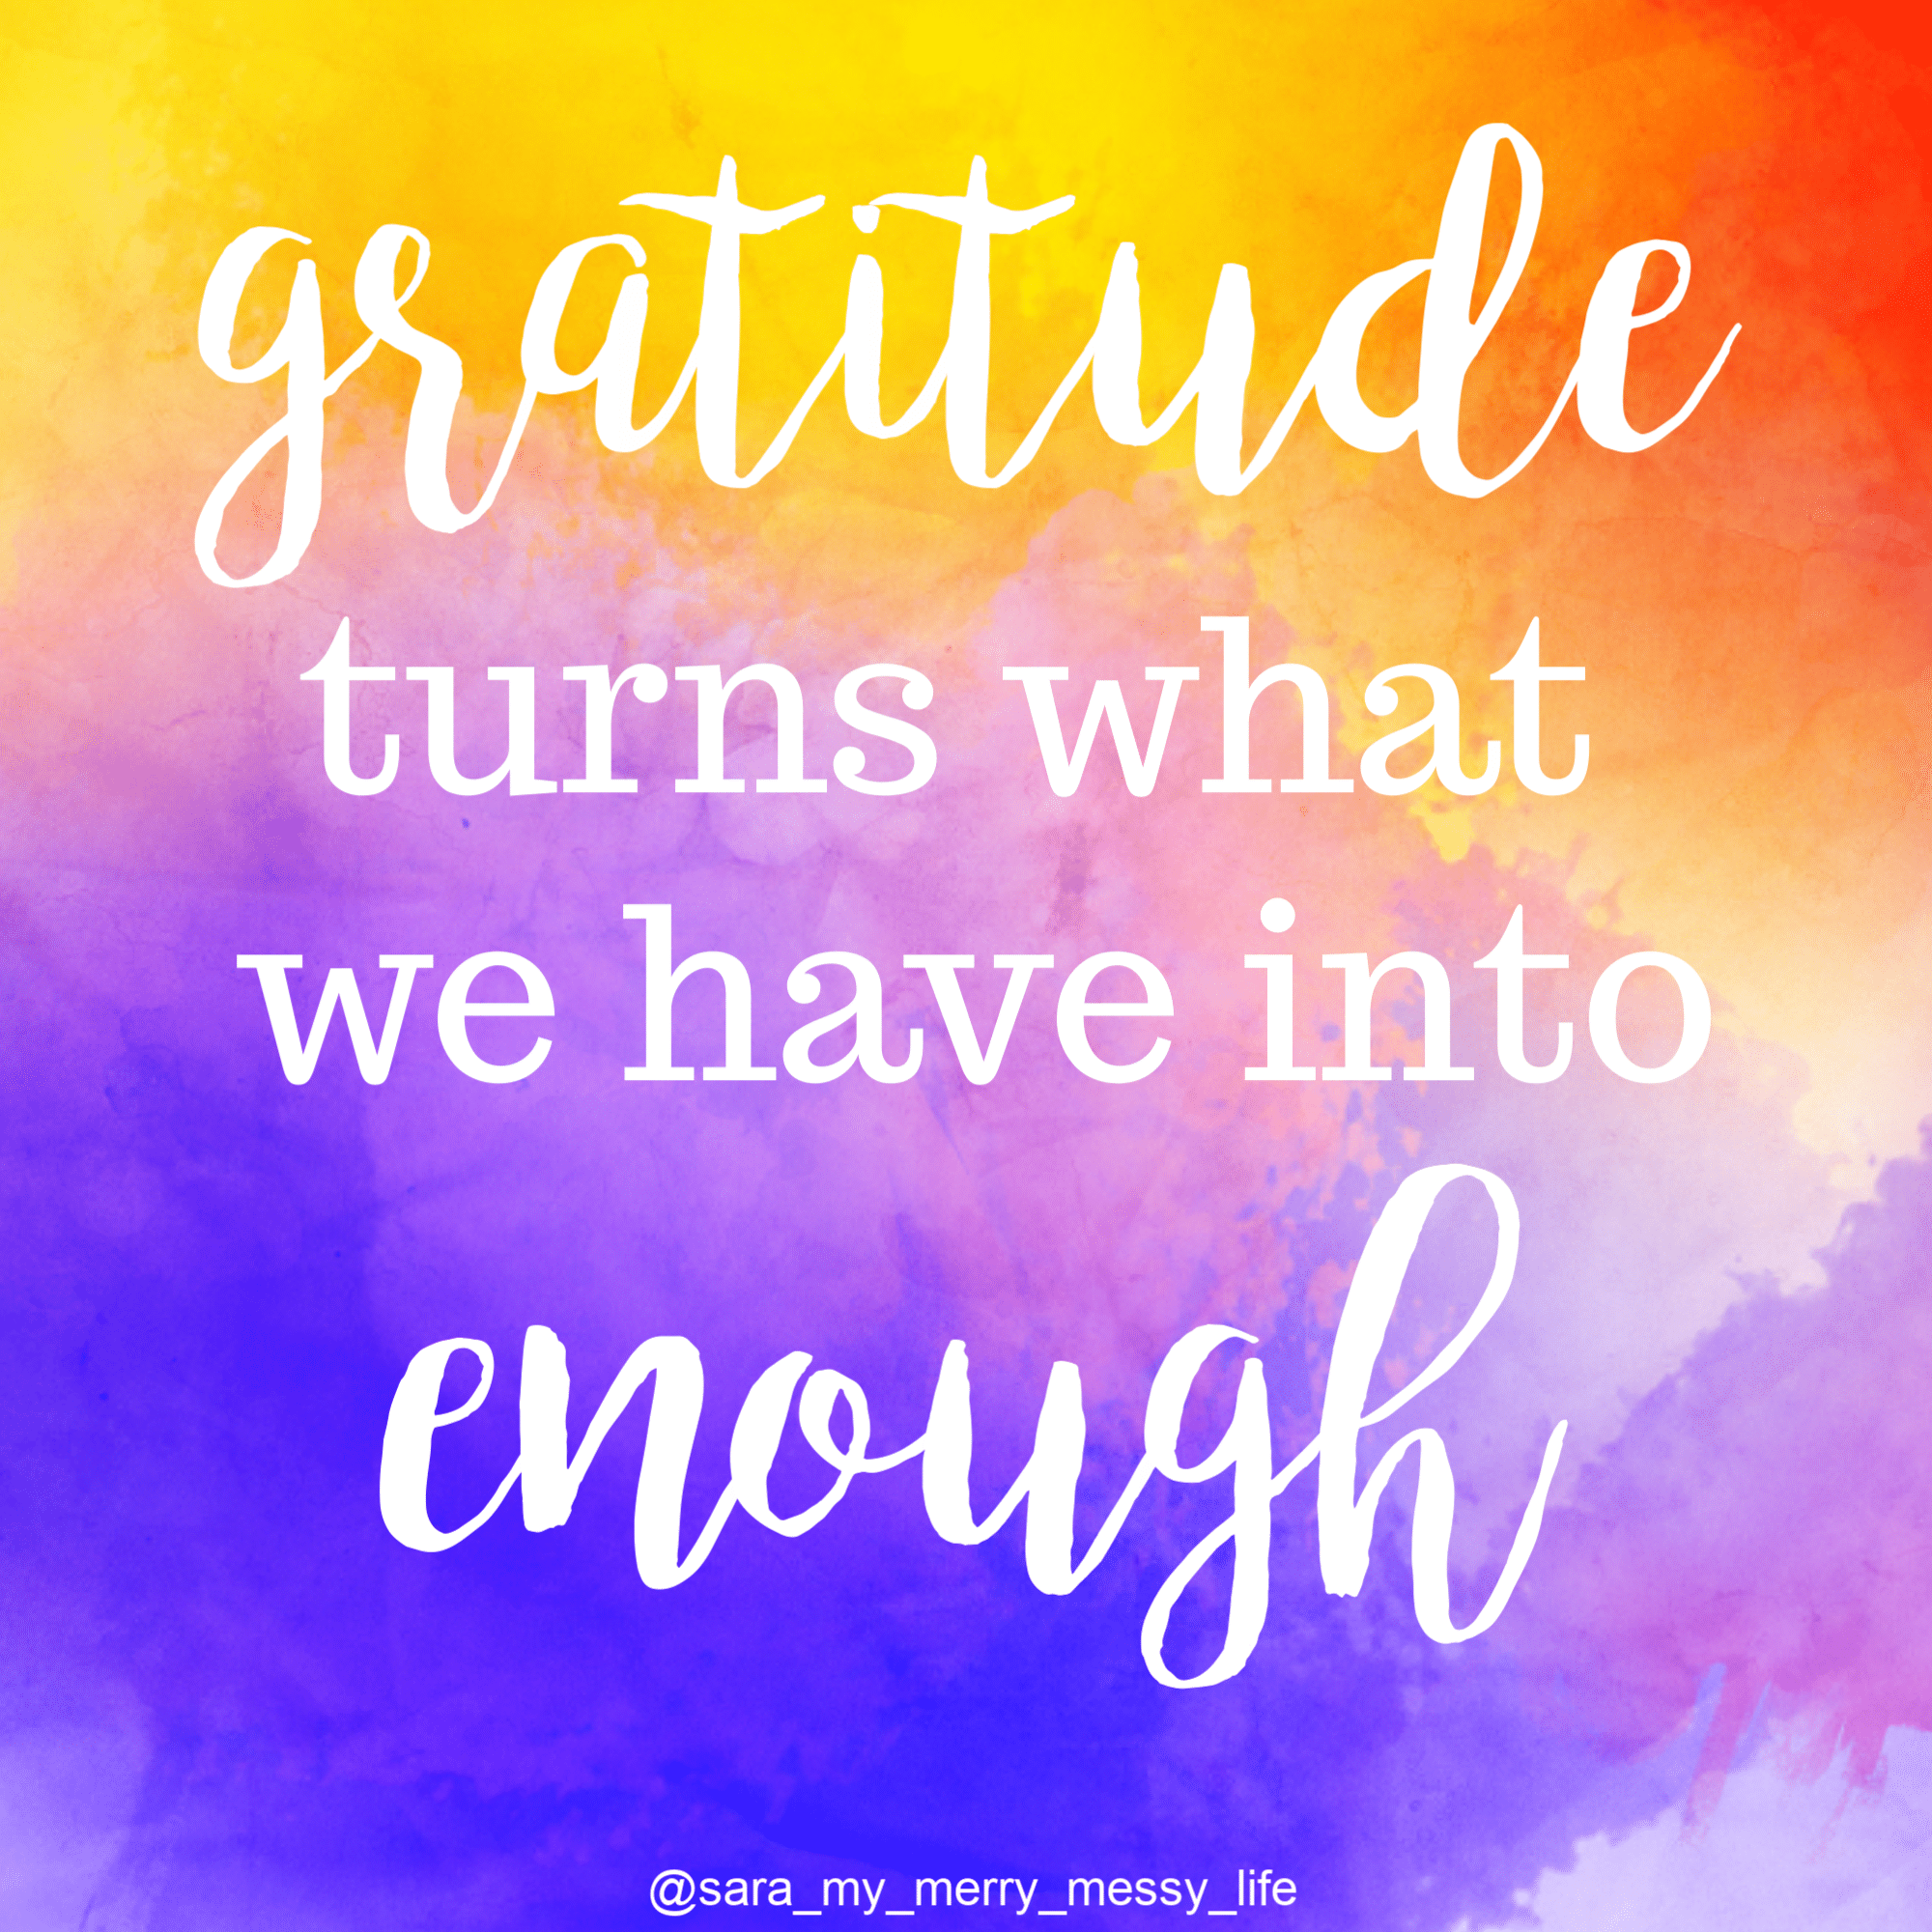 Gratitude turns what we have into enough.